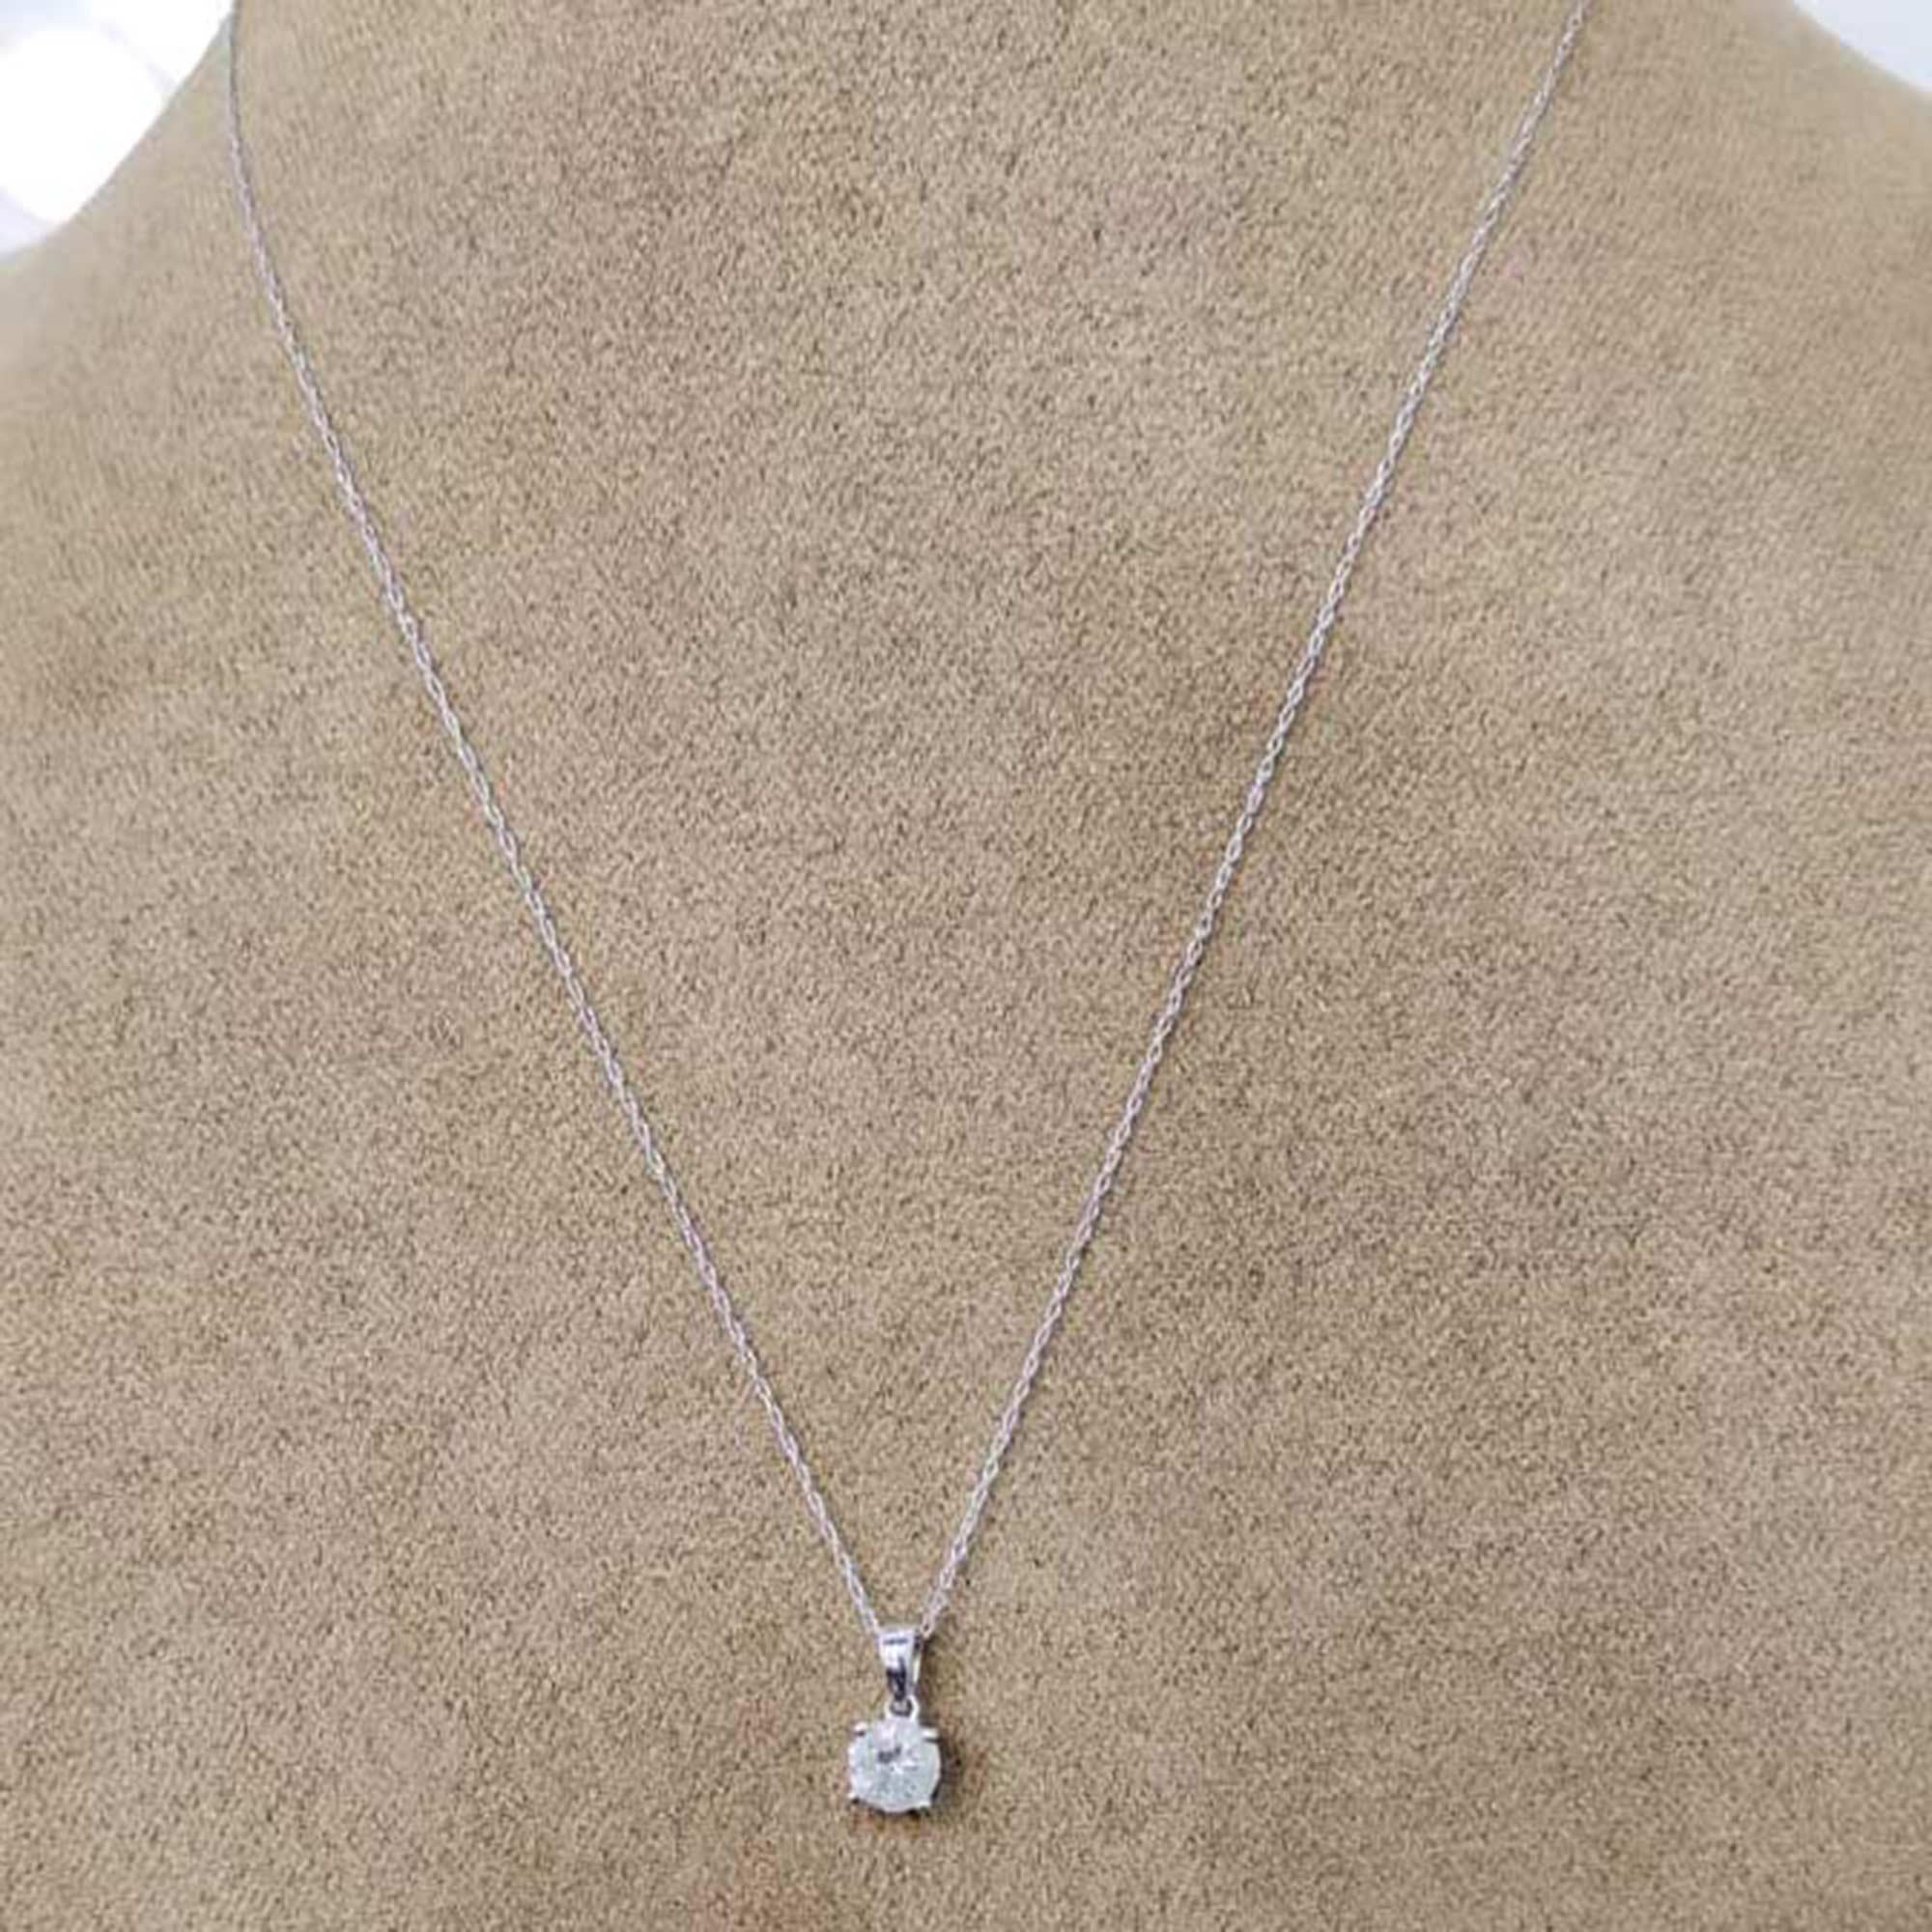 Beautifully hand-crafted by our skillful craftsmen in 14-karat white gold and this pendant features 1 brilliant-cut diamond studded in prong setting. The diamonds are graded H-I Color, I3 Clarity. The pendant comes along with an 18-inch cable chain.